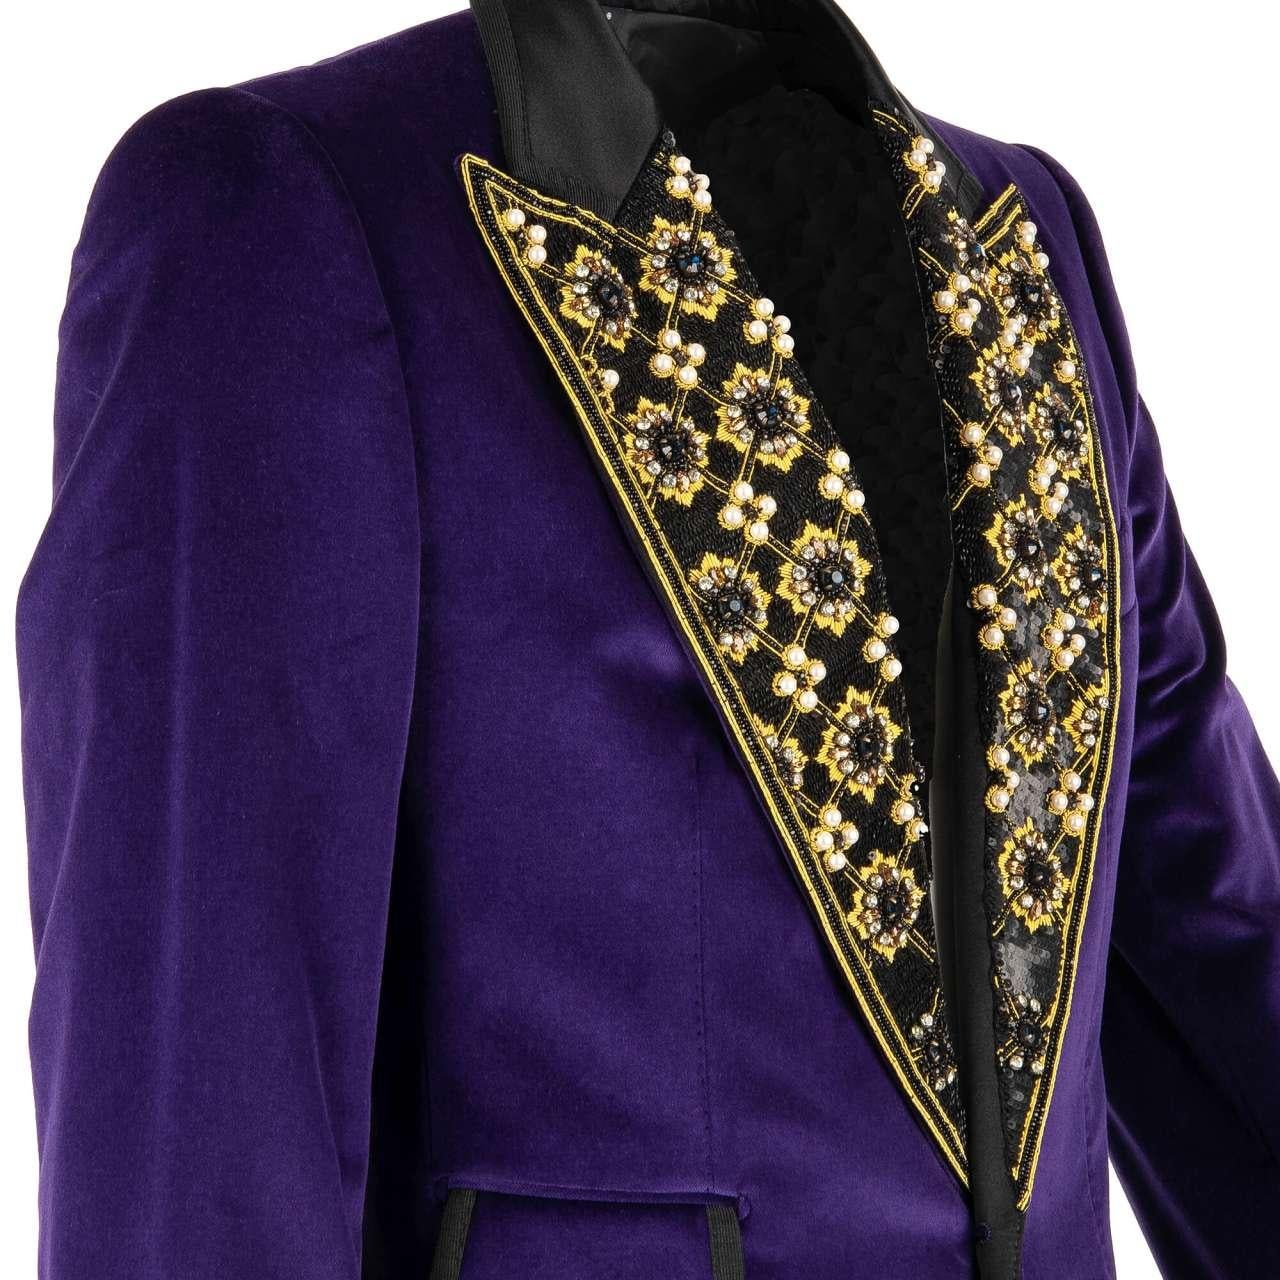 Men's D&G Velvet Tuxedo Blazer with Crystals, Pearls and Sequins Purple Black 46 For Sale